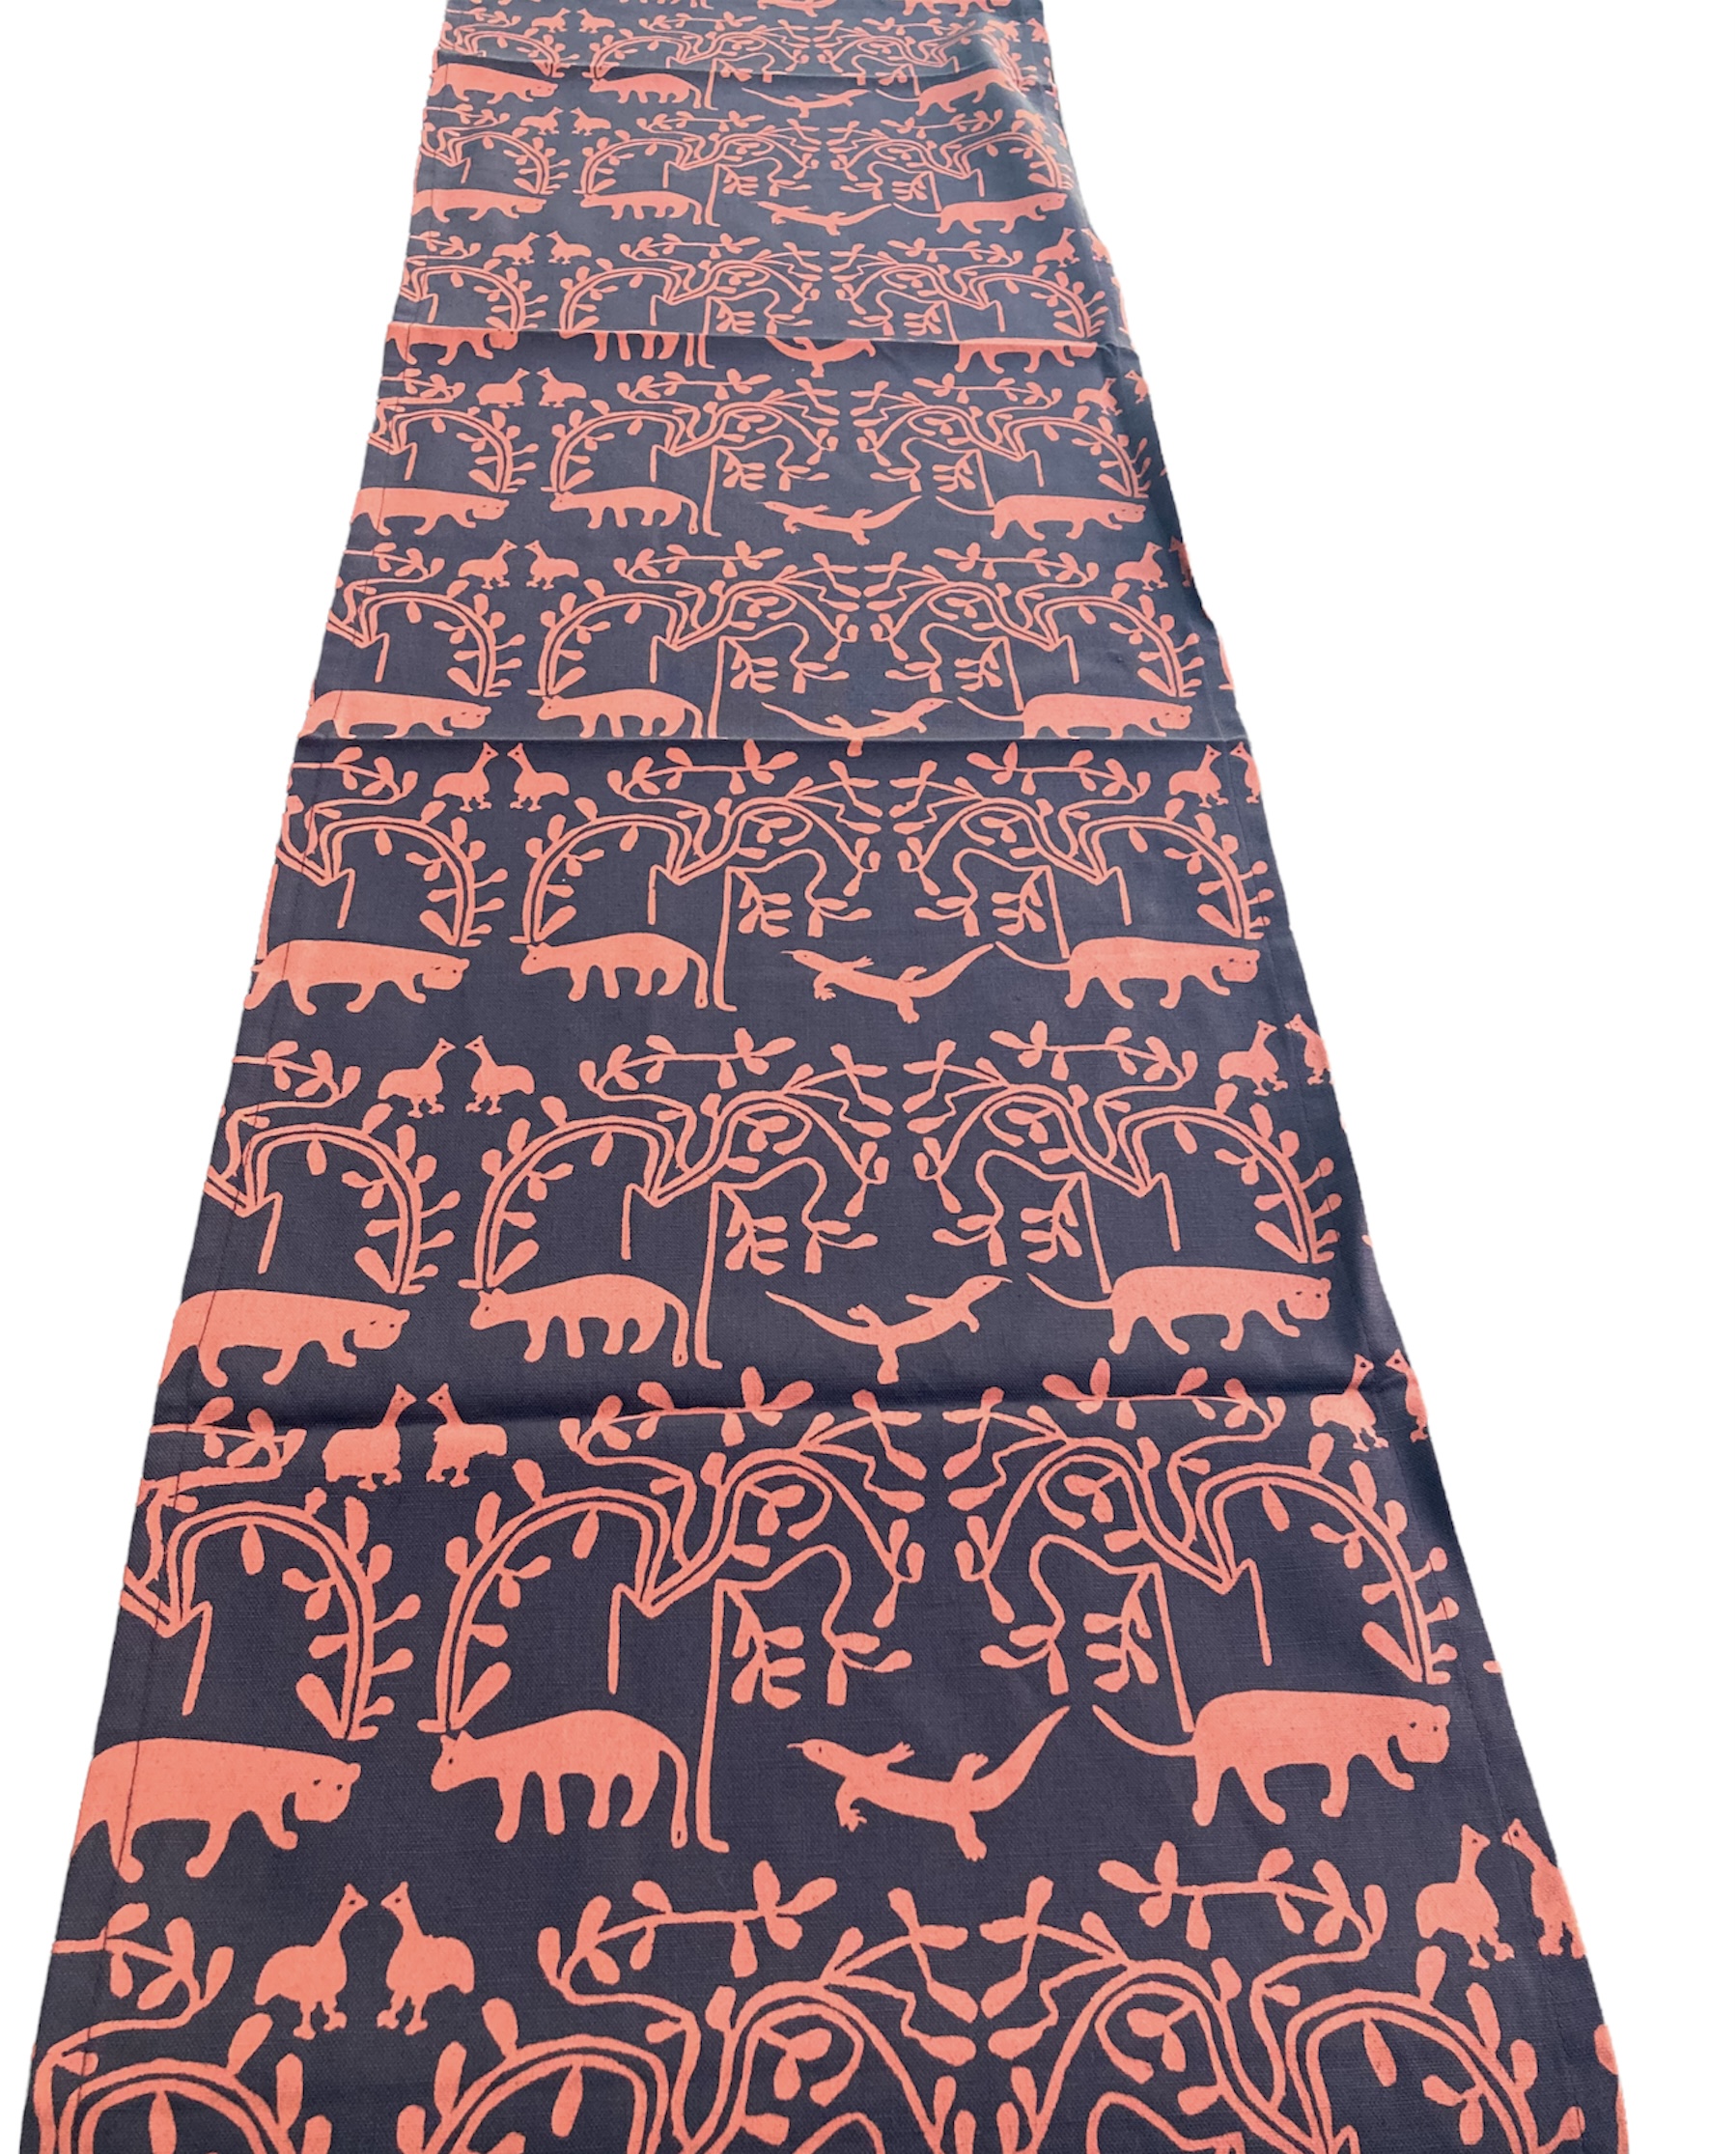 100% cotton Table Runner 58\" x 16\" from Namibia - Design 08s